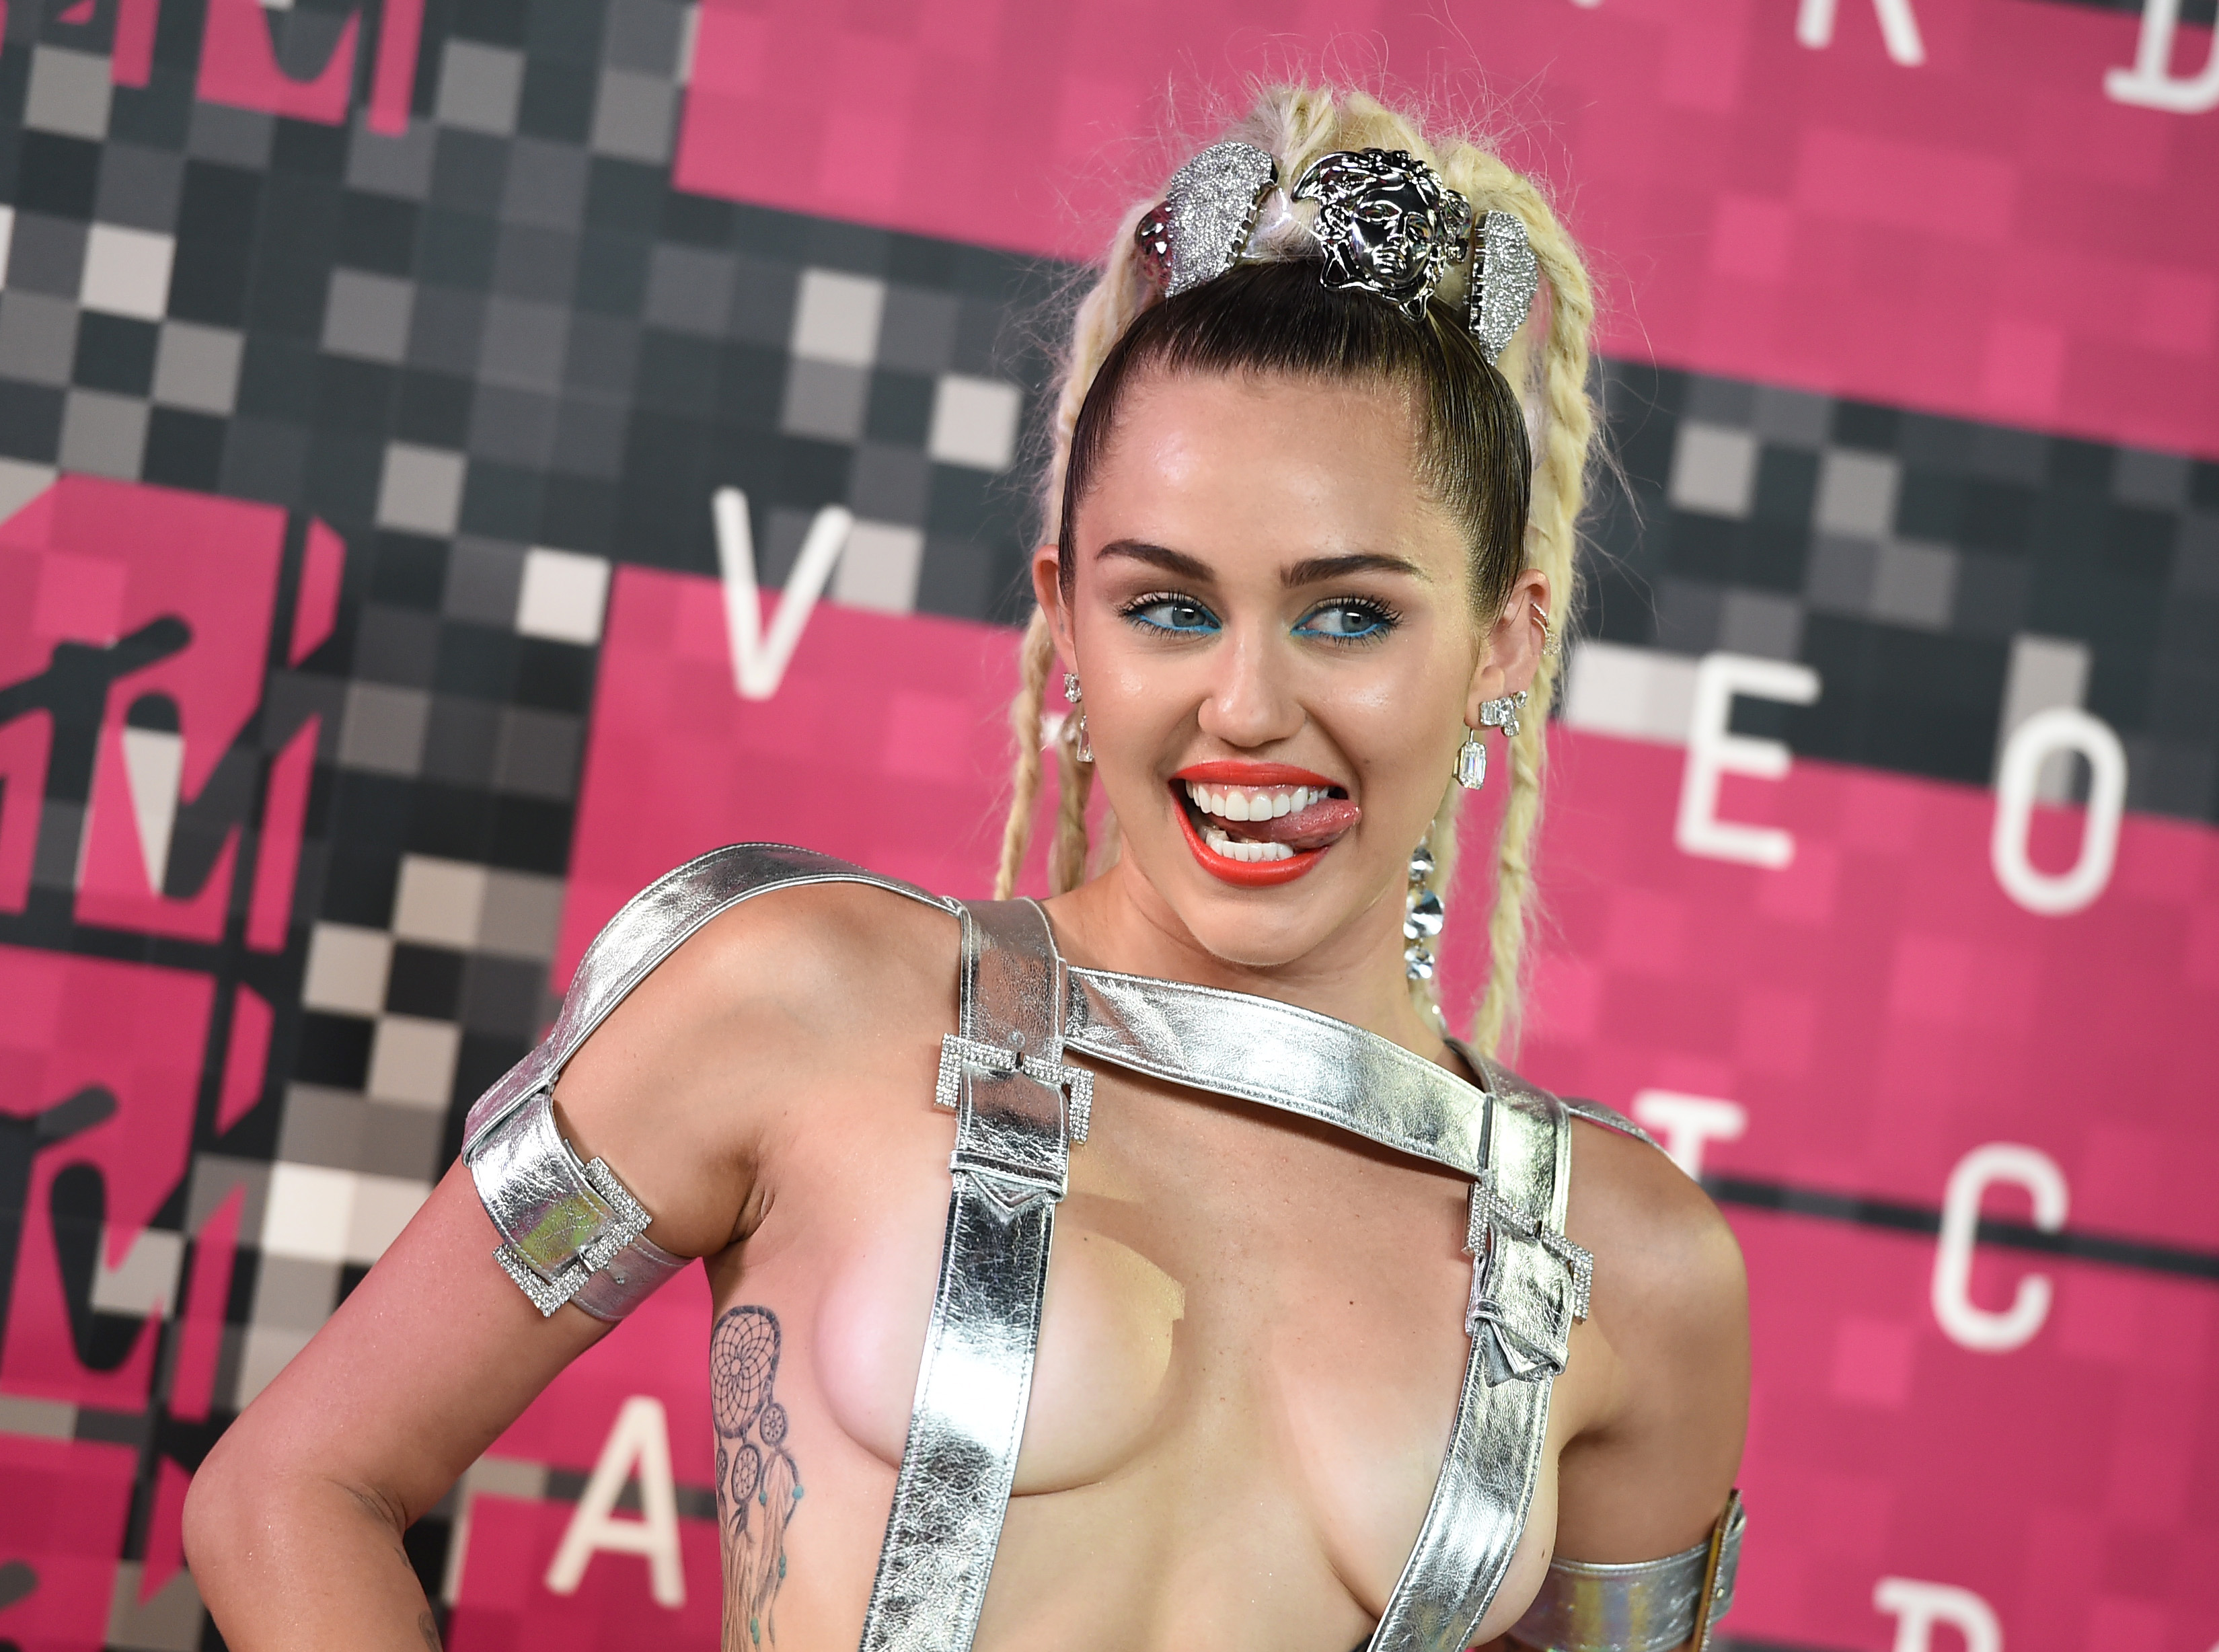 Hidden Cam Voyeur Miley Cyrus - This is what Miley Cyrus wore to the MTV Awards - NZ Herald